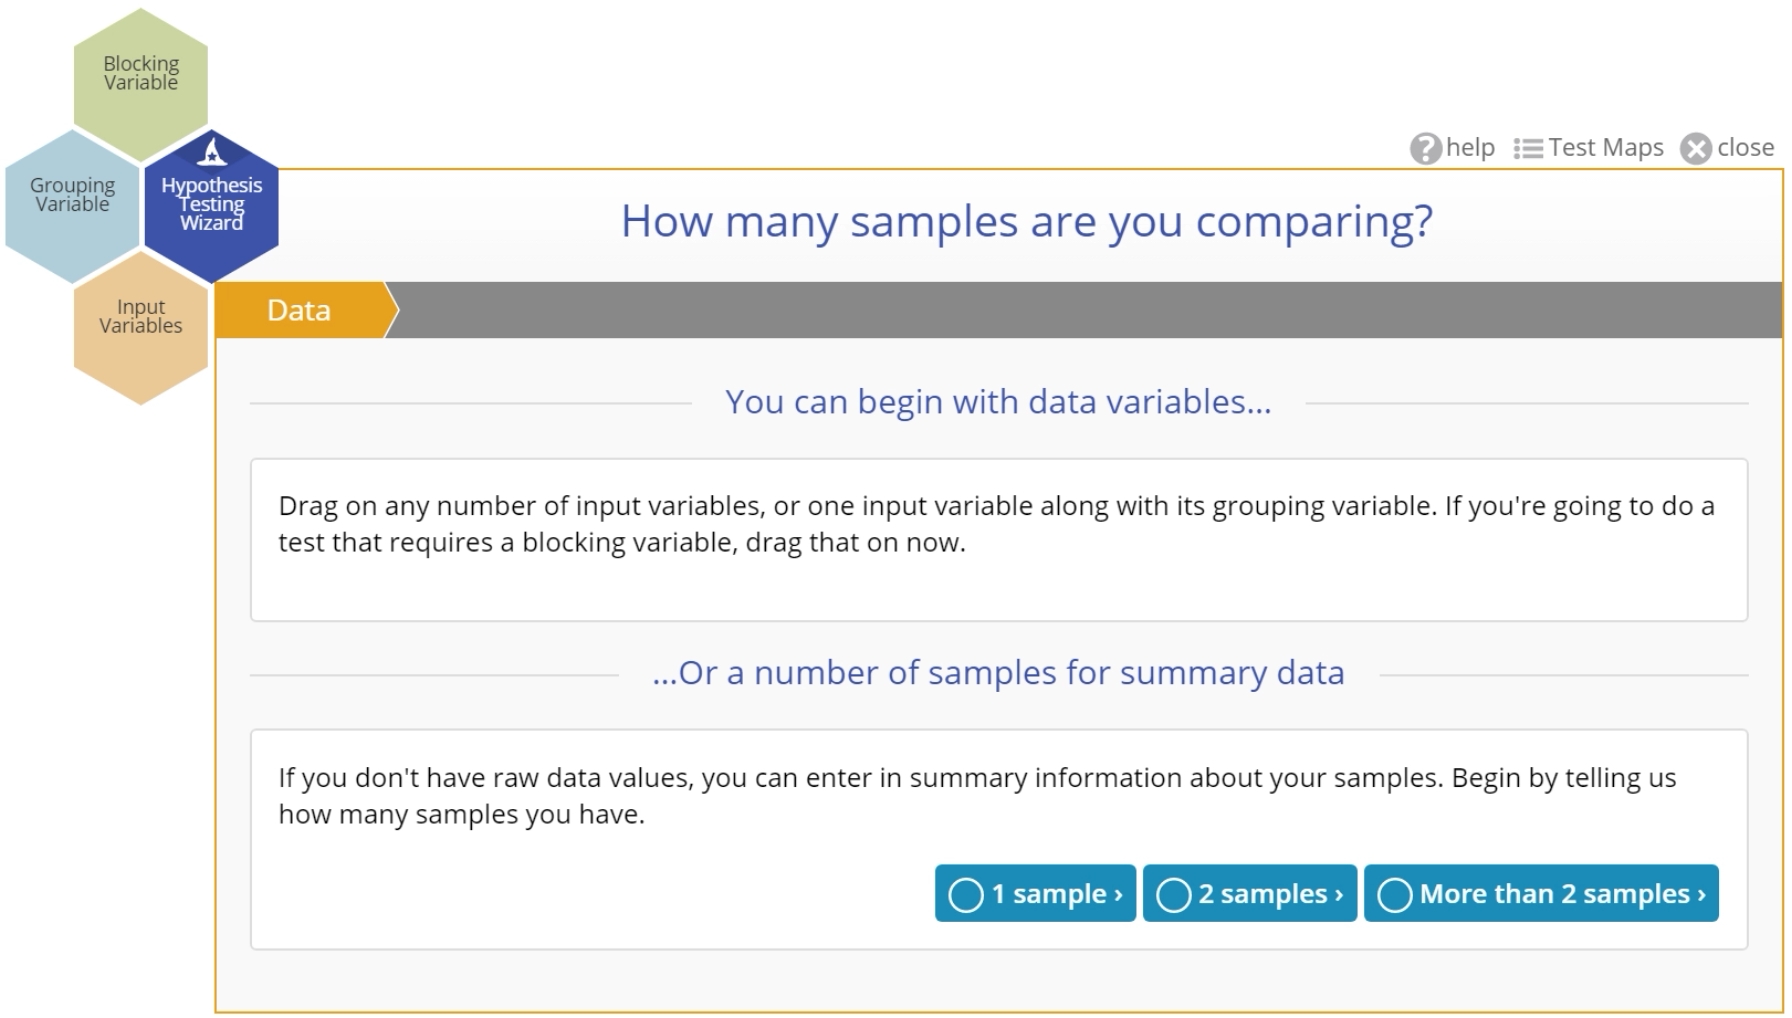 Pop up asking how many samples are being compared.